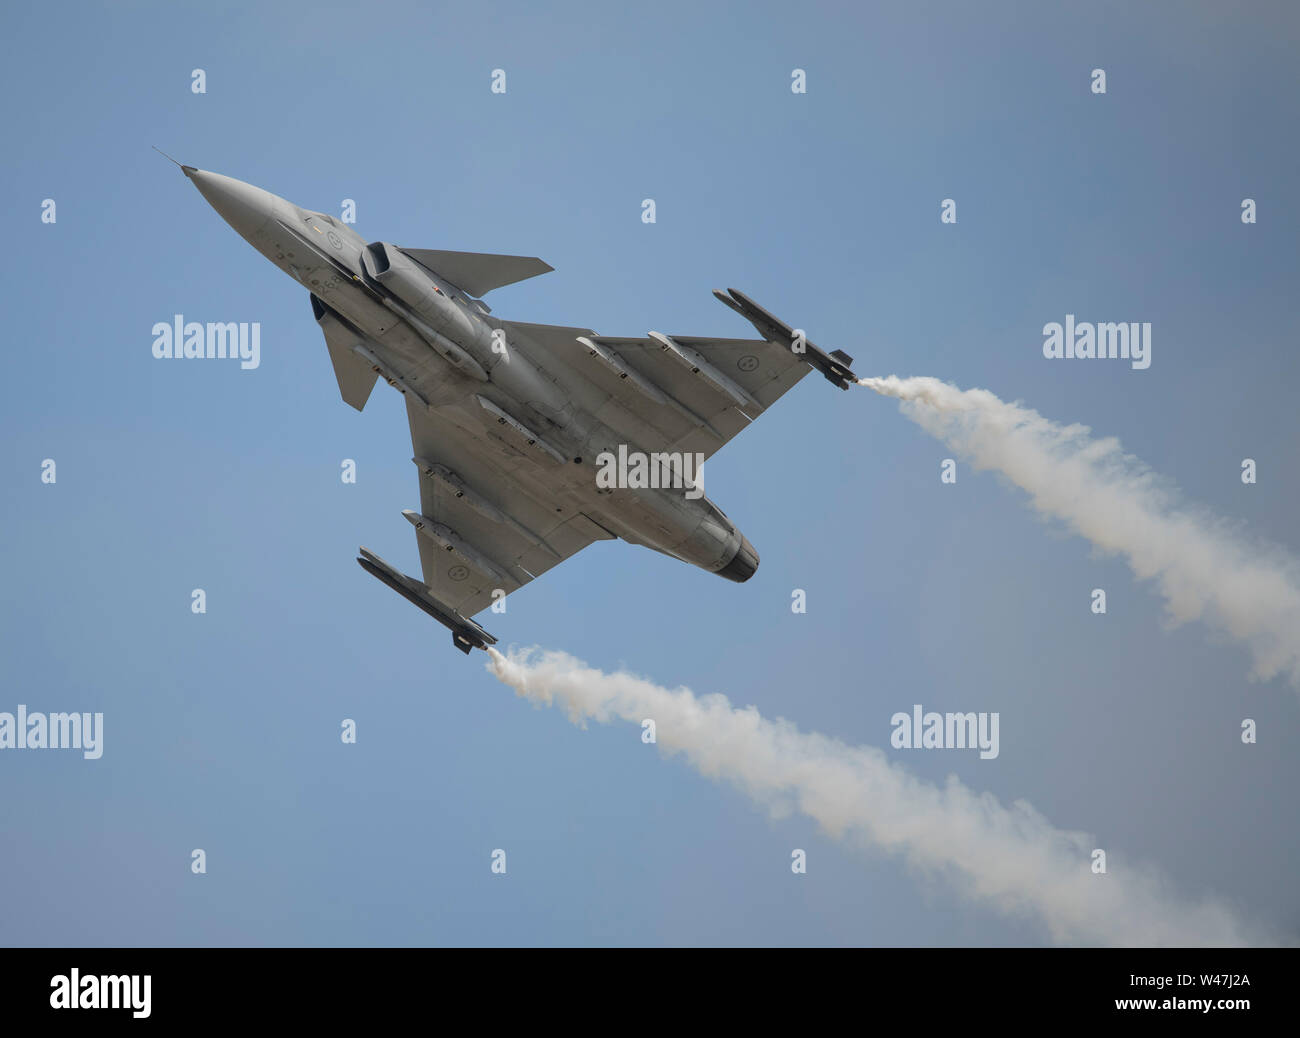 RAF Fairford, Glos, UK. 20th July 2019. Day 2 of The Royal International Air Tattoo (RIAT) with military aircraft from around the world assembling for the world’s greatest airshow with a full flying display in good weather. Image: Saab JAS 39C Gripen flying display from the Swedish Air Force. Credit: Malcolm Park/Alamy Live News. Stock Photo